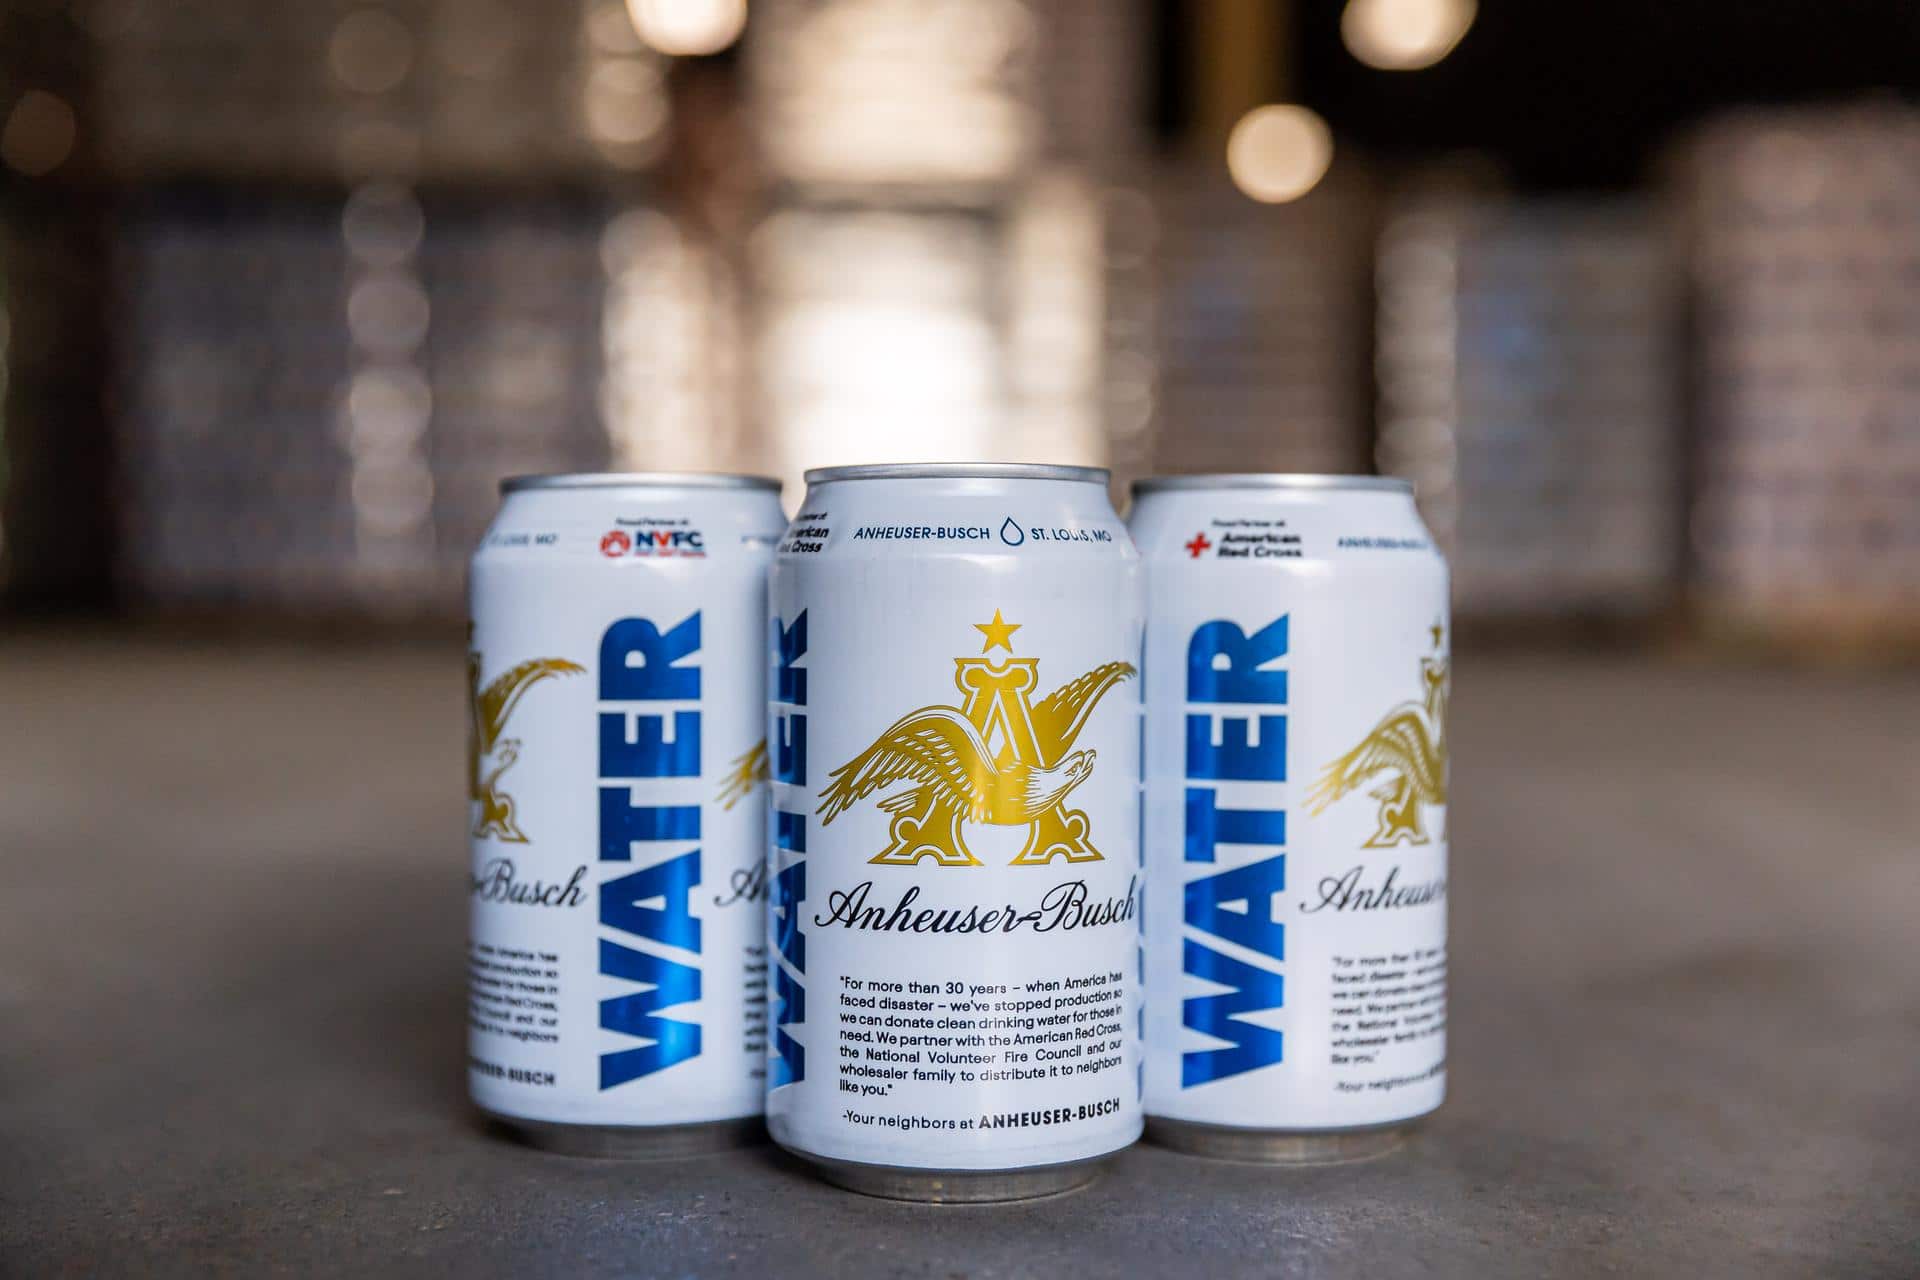 Anheuser-Busch Renews Partnership with National Volunteer Fire Council to Deliver 1.5 Million Cans of Emergency Drinking Water to Local Fire Departments Across the United States